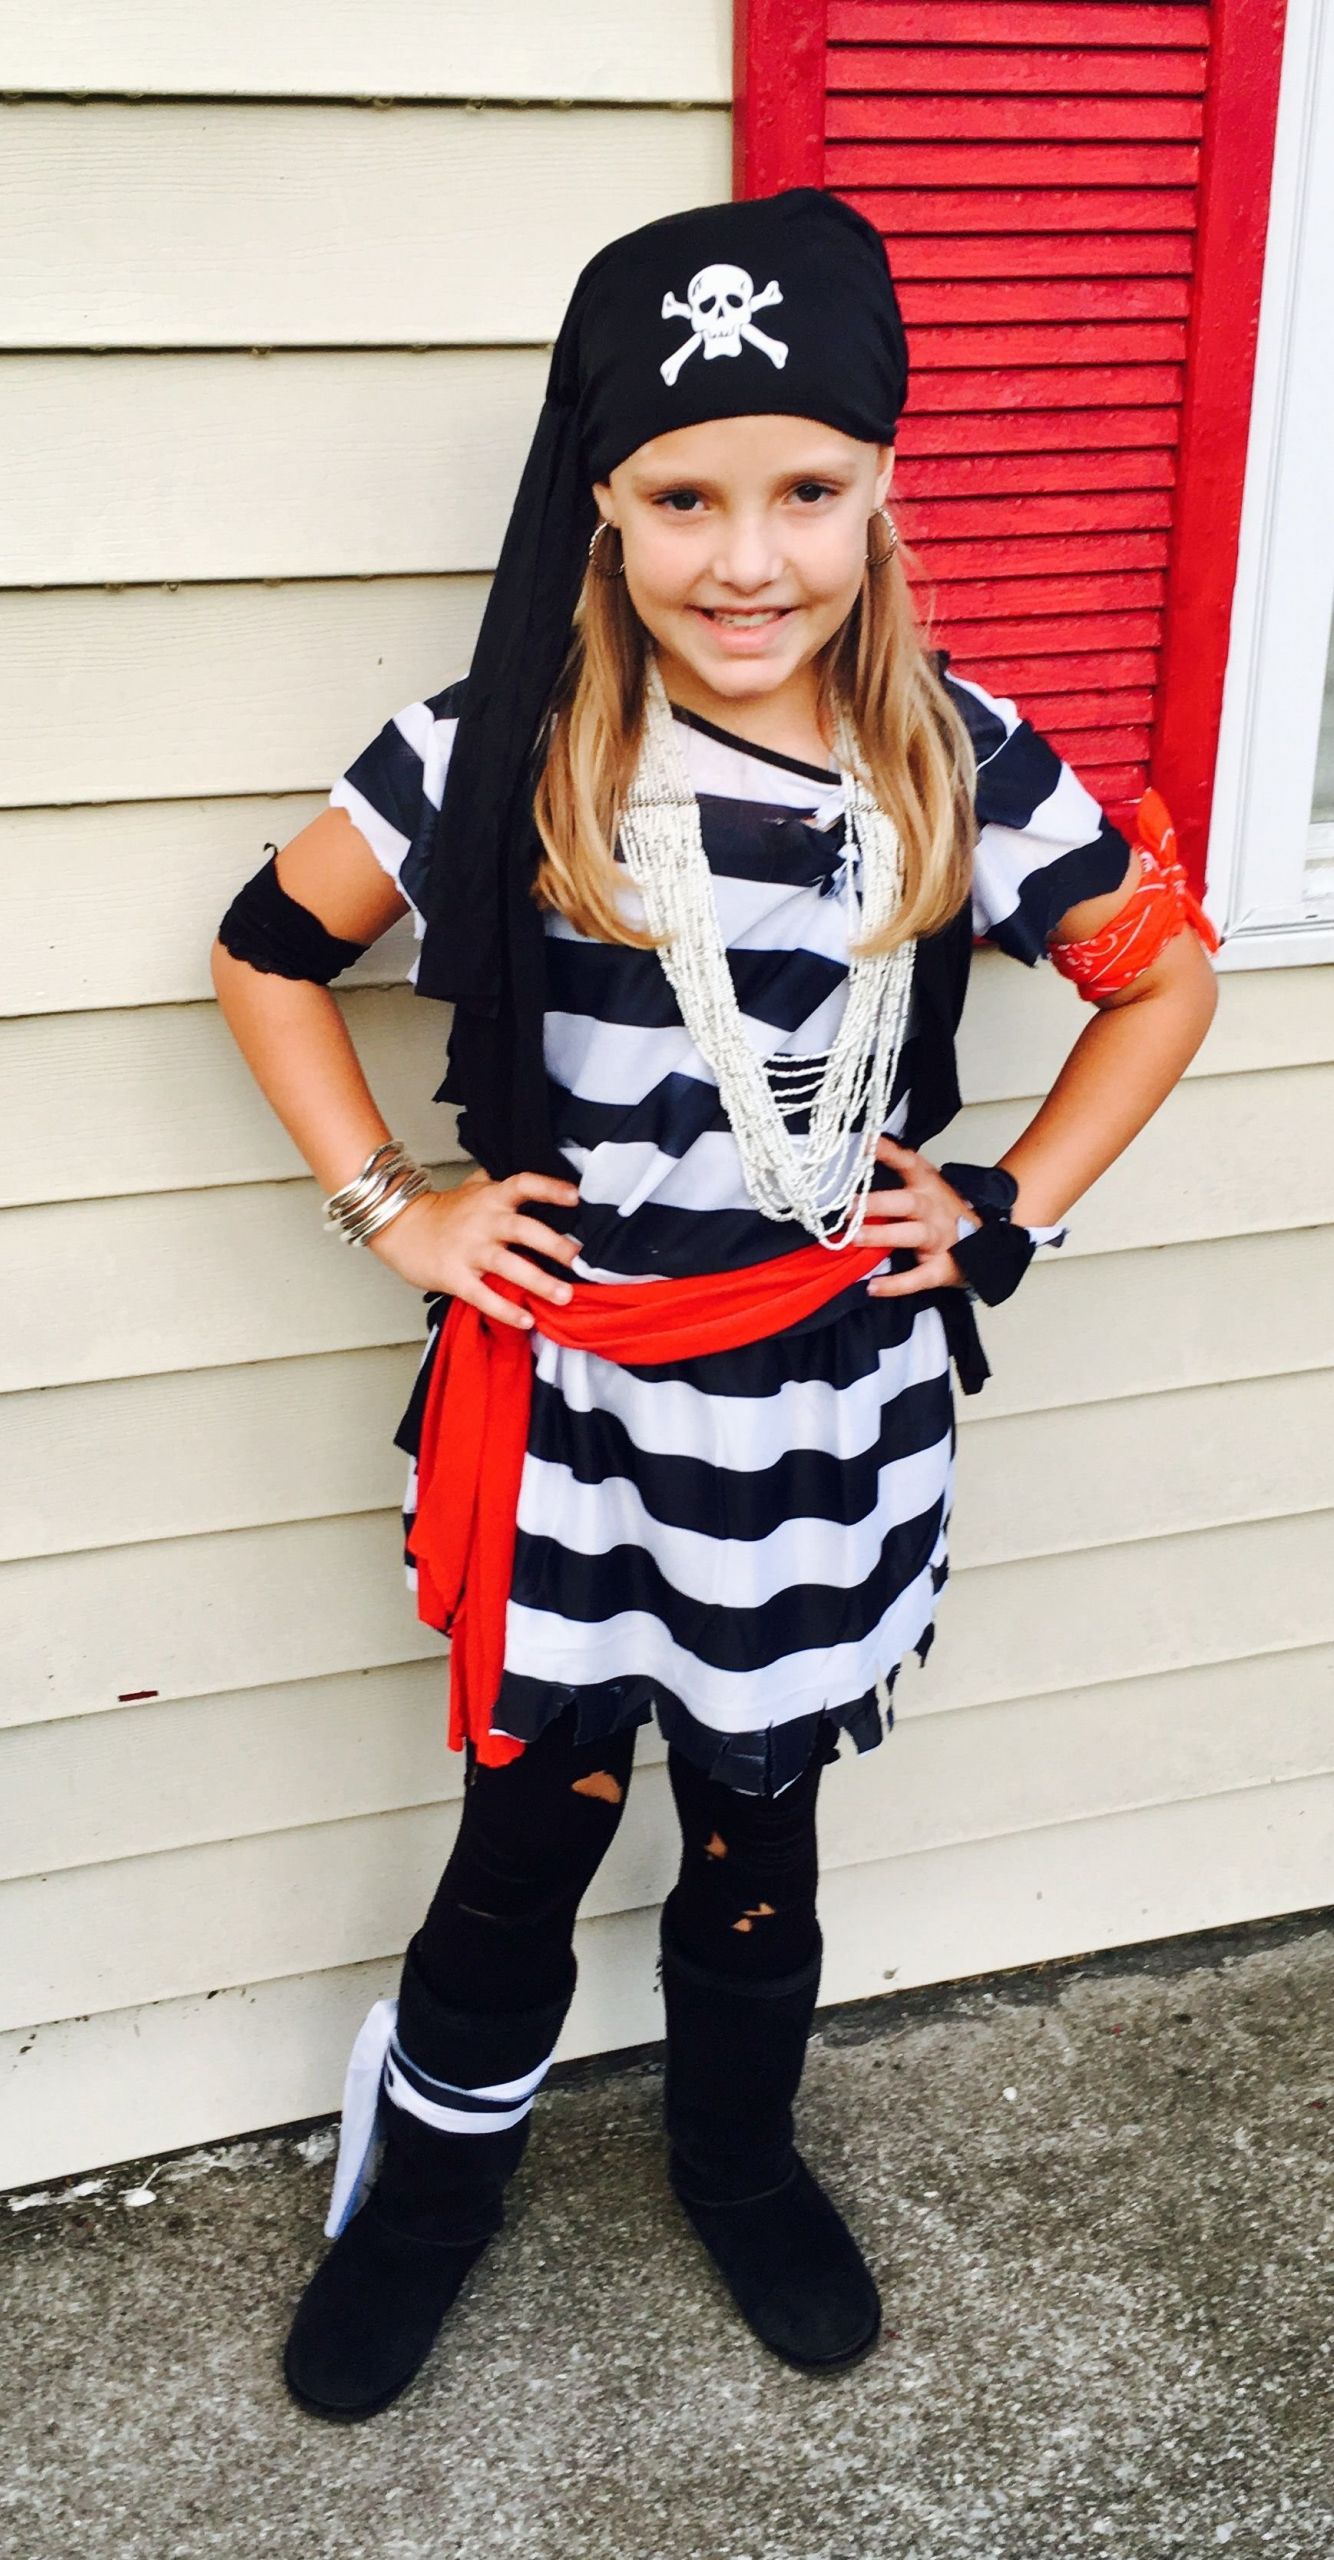 DIY Kids Costume Ideas
 10 Attractive Homemade Pirate Costume Ideas For Kids 2019